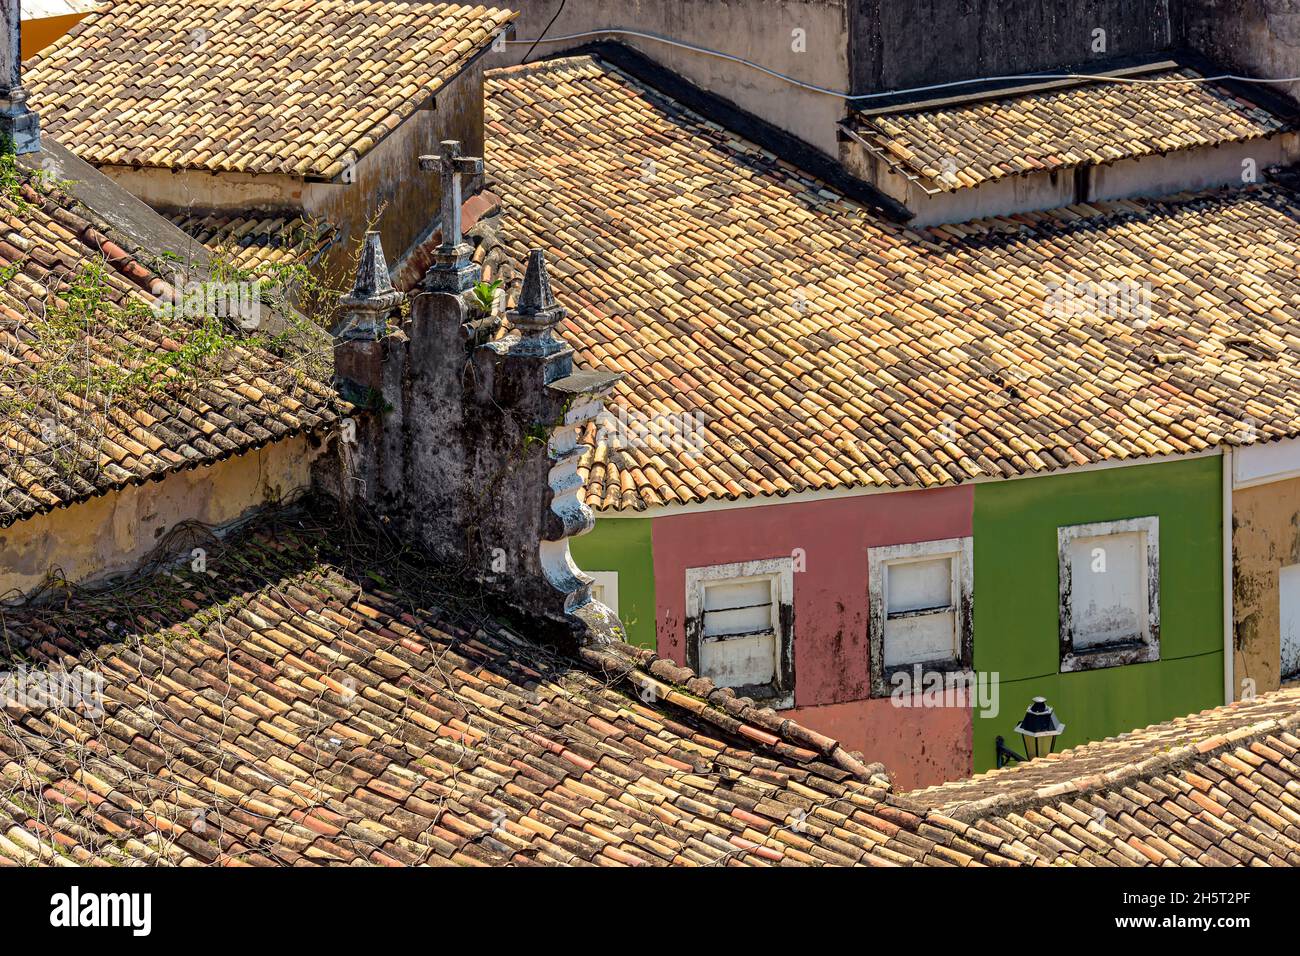 Roofs of old colonial-style houses and churches seen from above and worn by time in the Pelourinho neighborhood of Salvador, Bahia Stock Photo